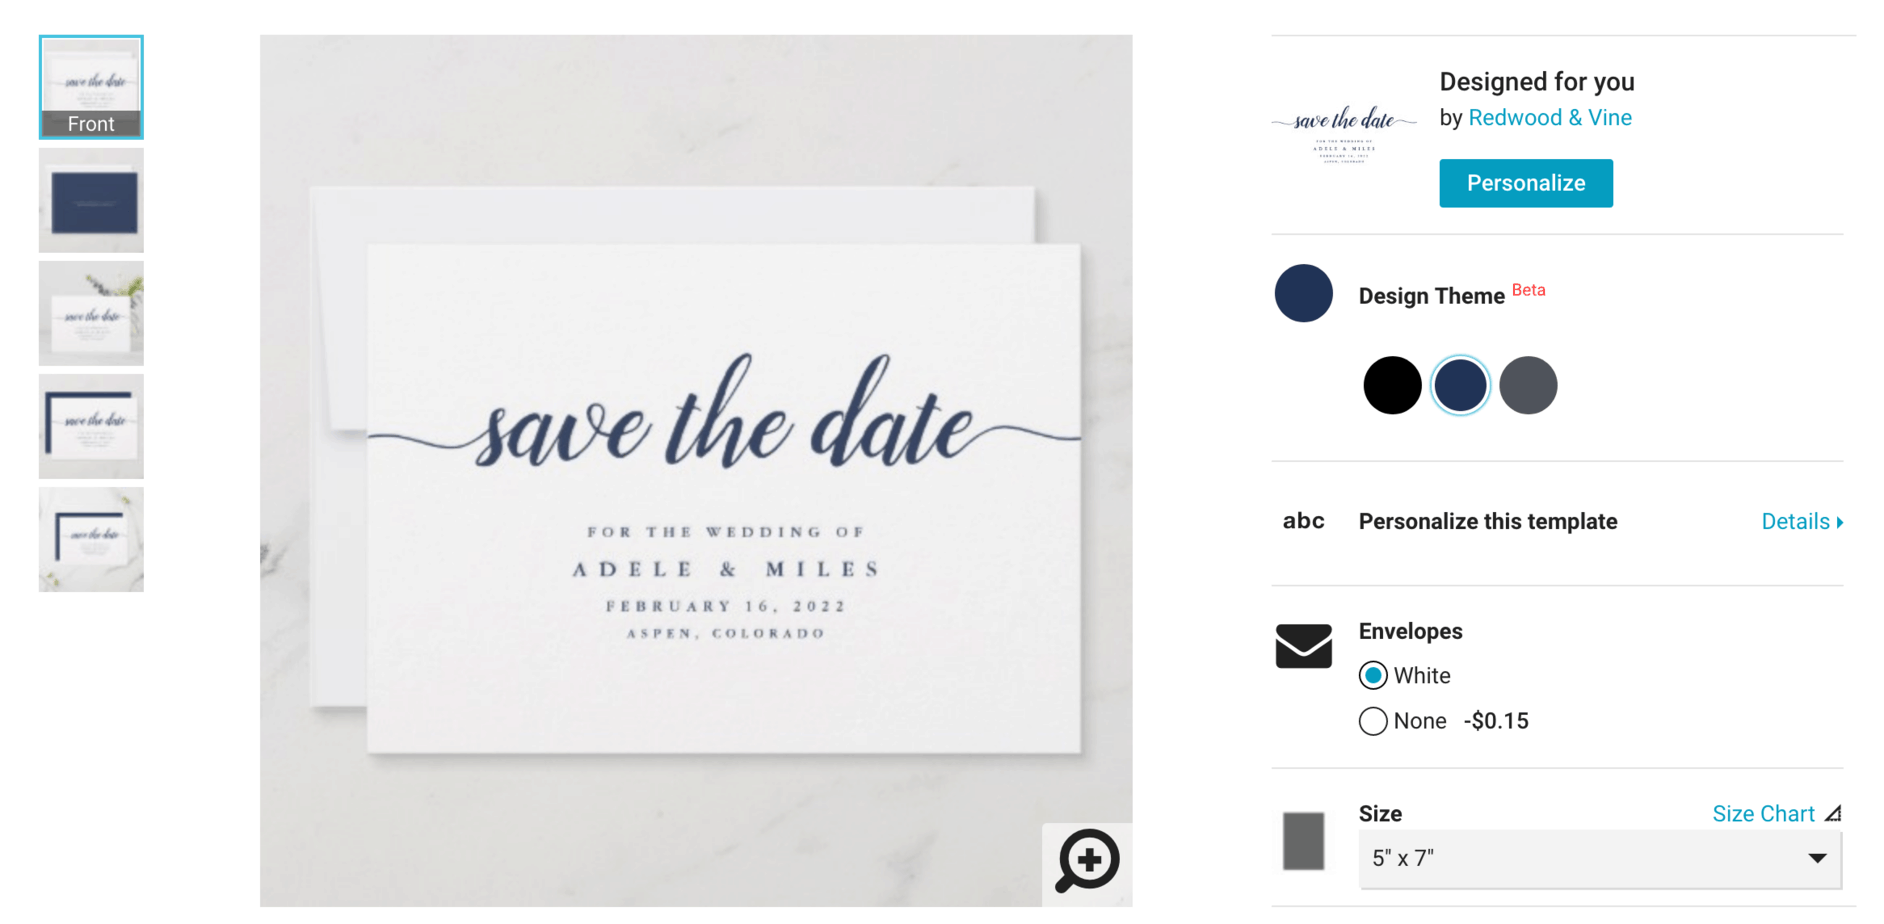 sell more on Zazzle: This color option shows the navy text design theme version for the save the date